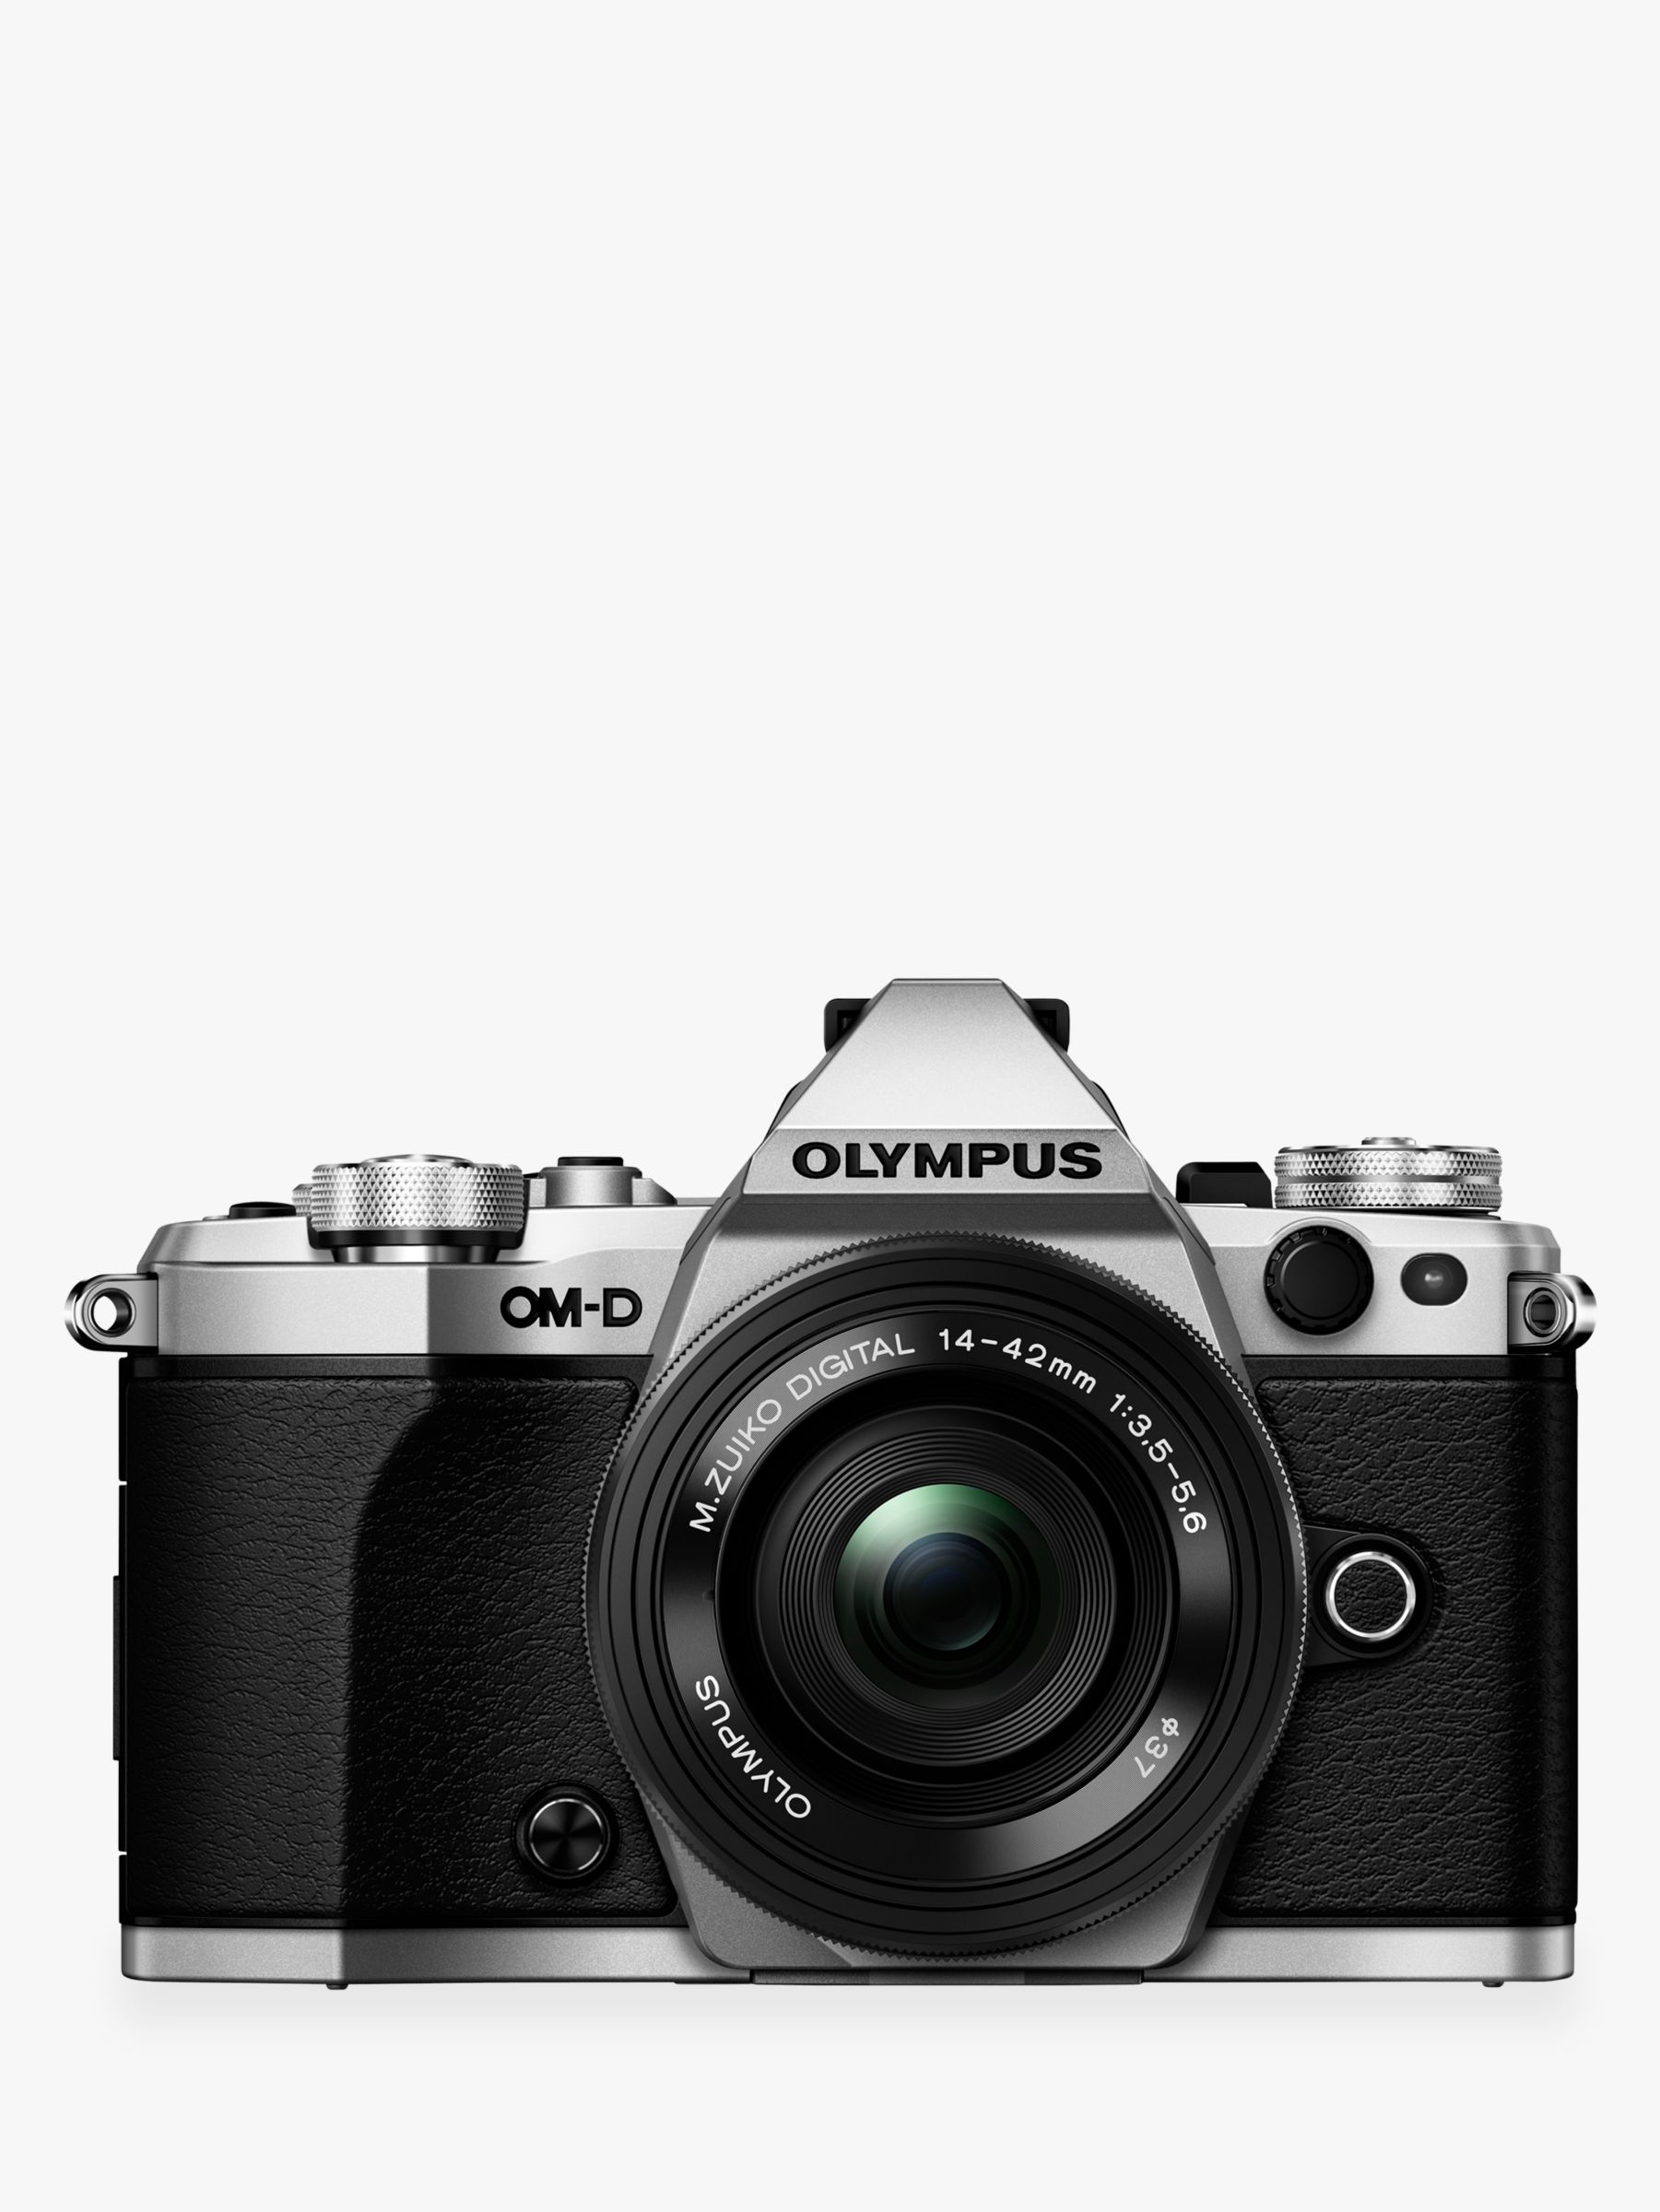 Image of Olympus OMD EM5 Mark II Compact System Camera HD 1080p 16MP WiFi 3 LCD Touch Screen with MZUIKO DIGITAL 1442mm EZ Lens